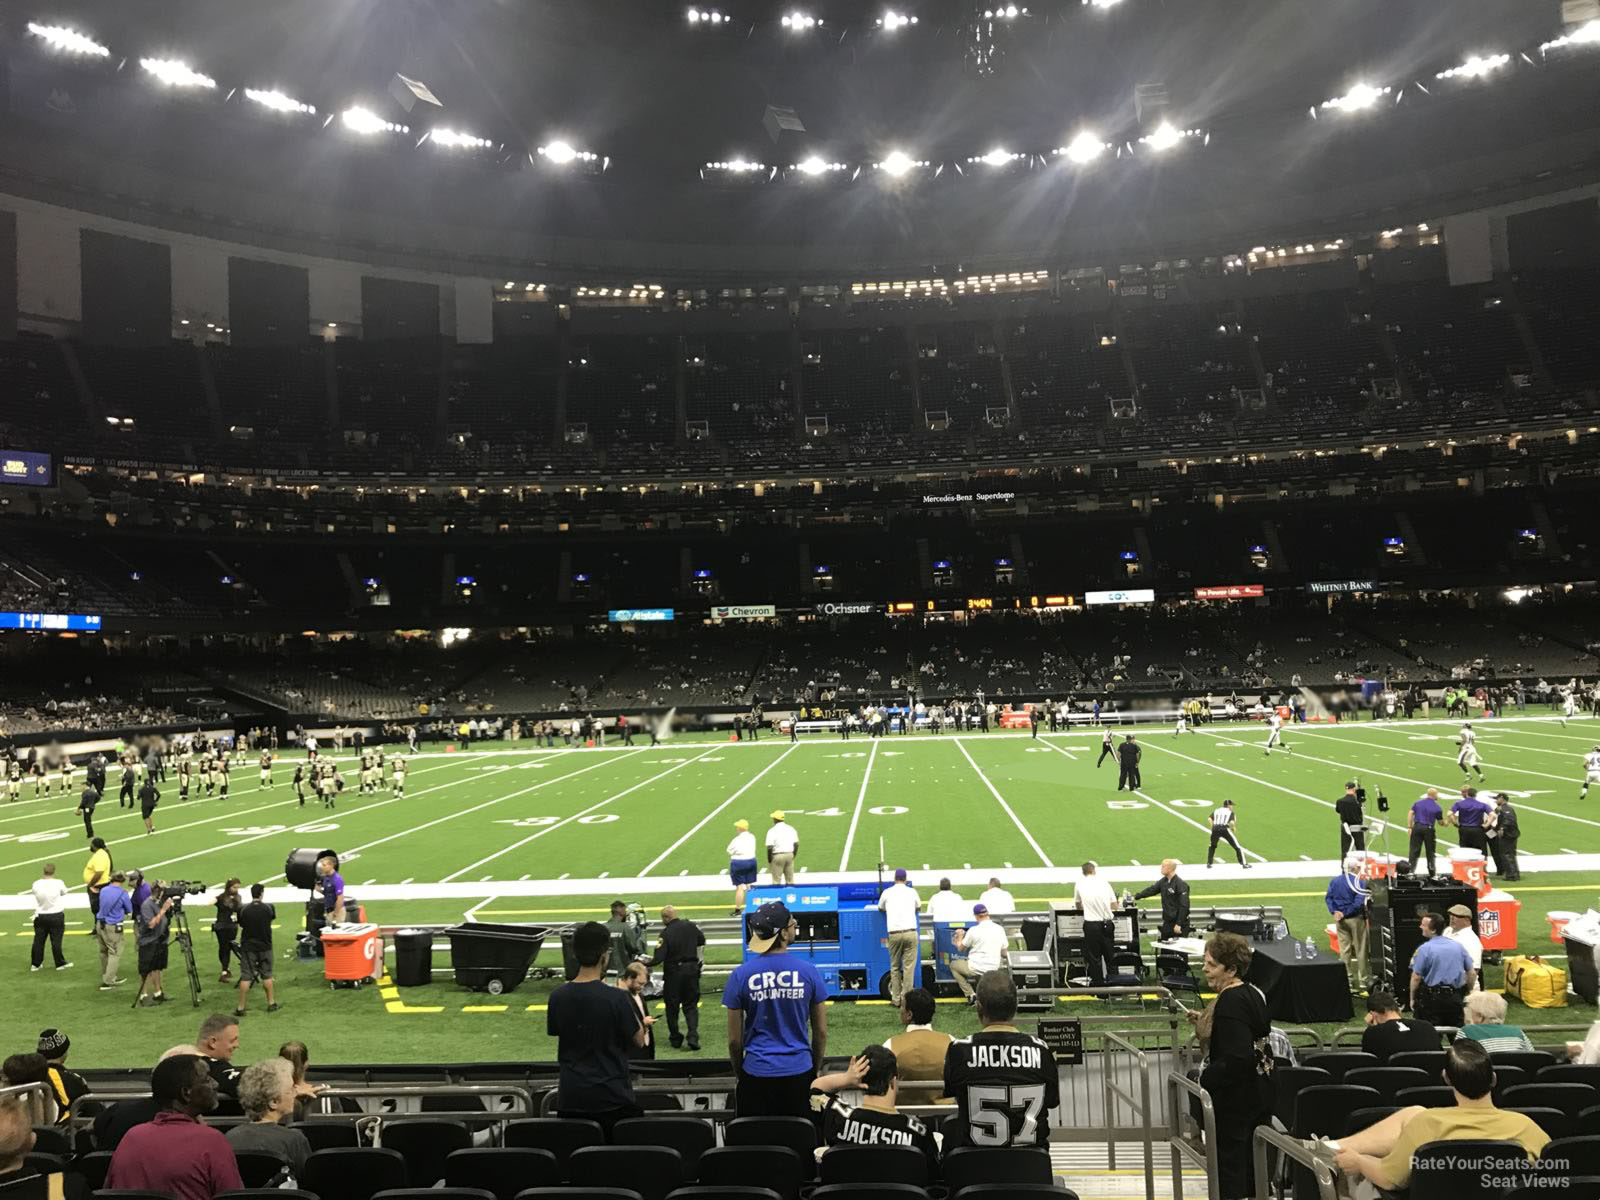 New Orleans Saints Superdome Seating Chart